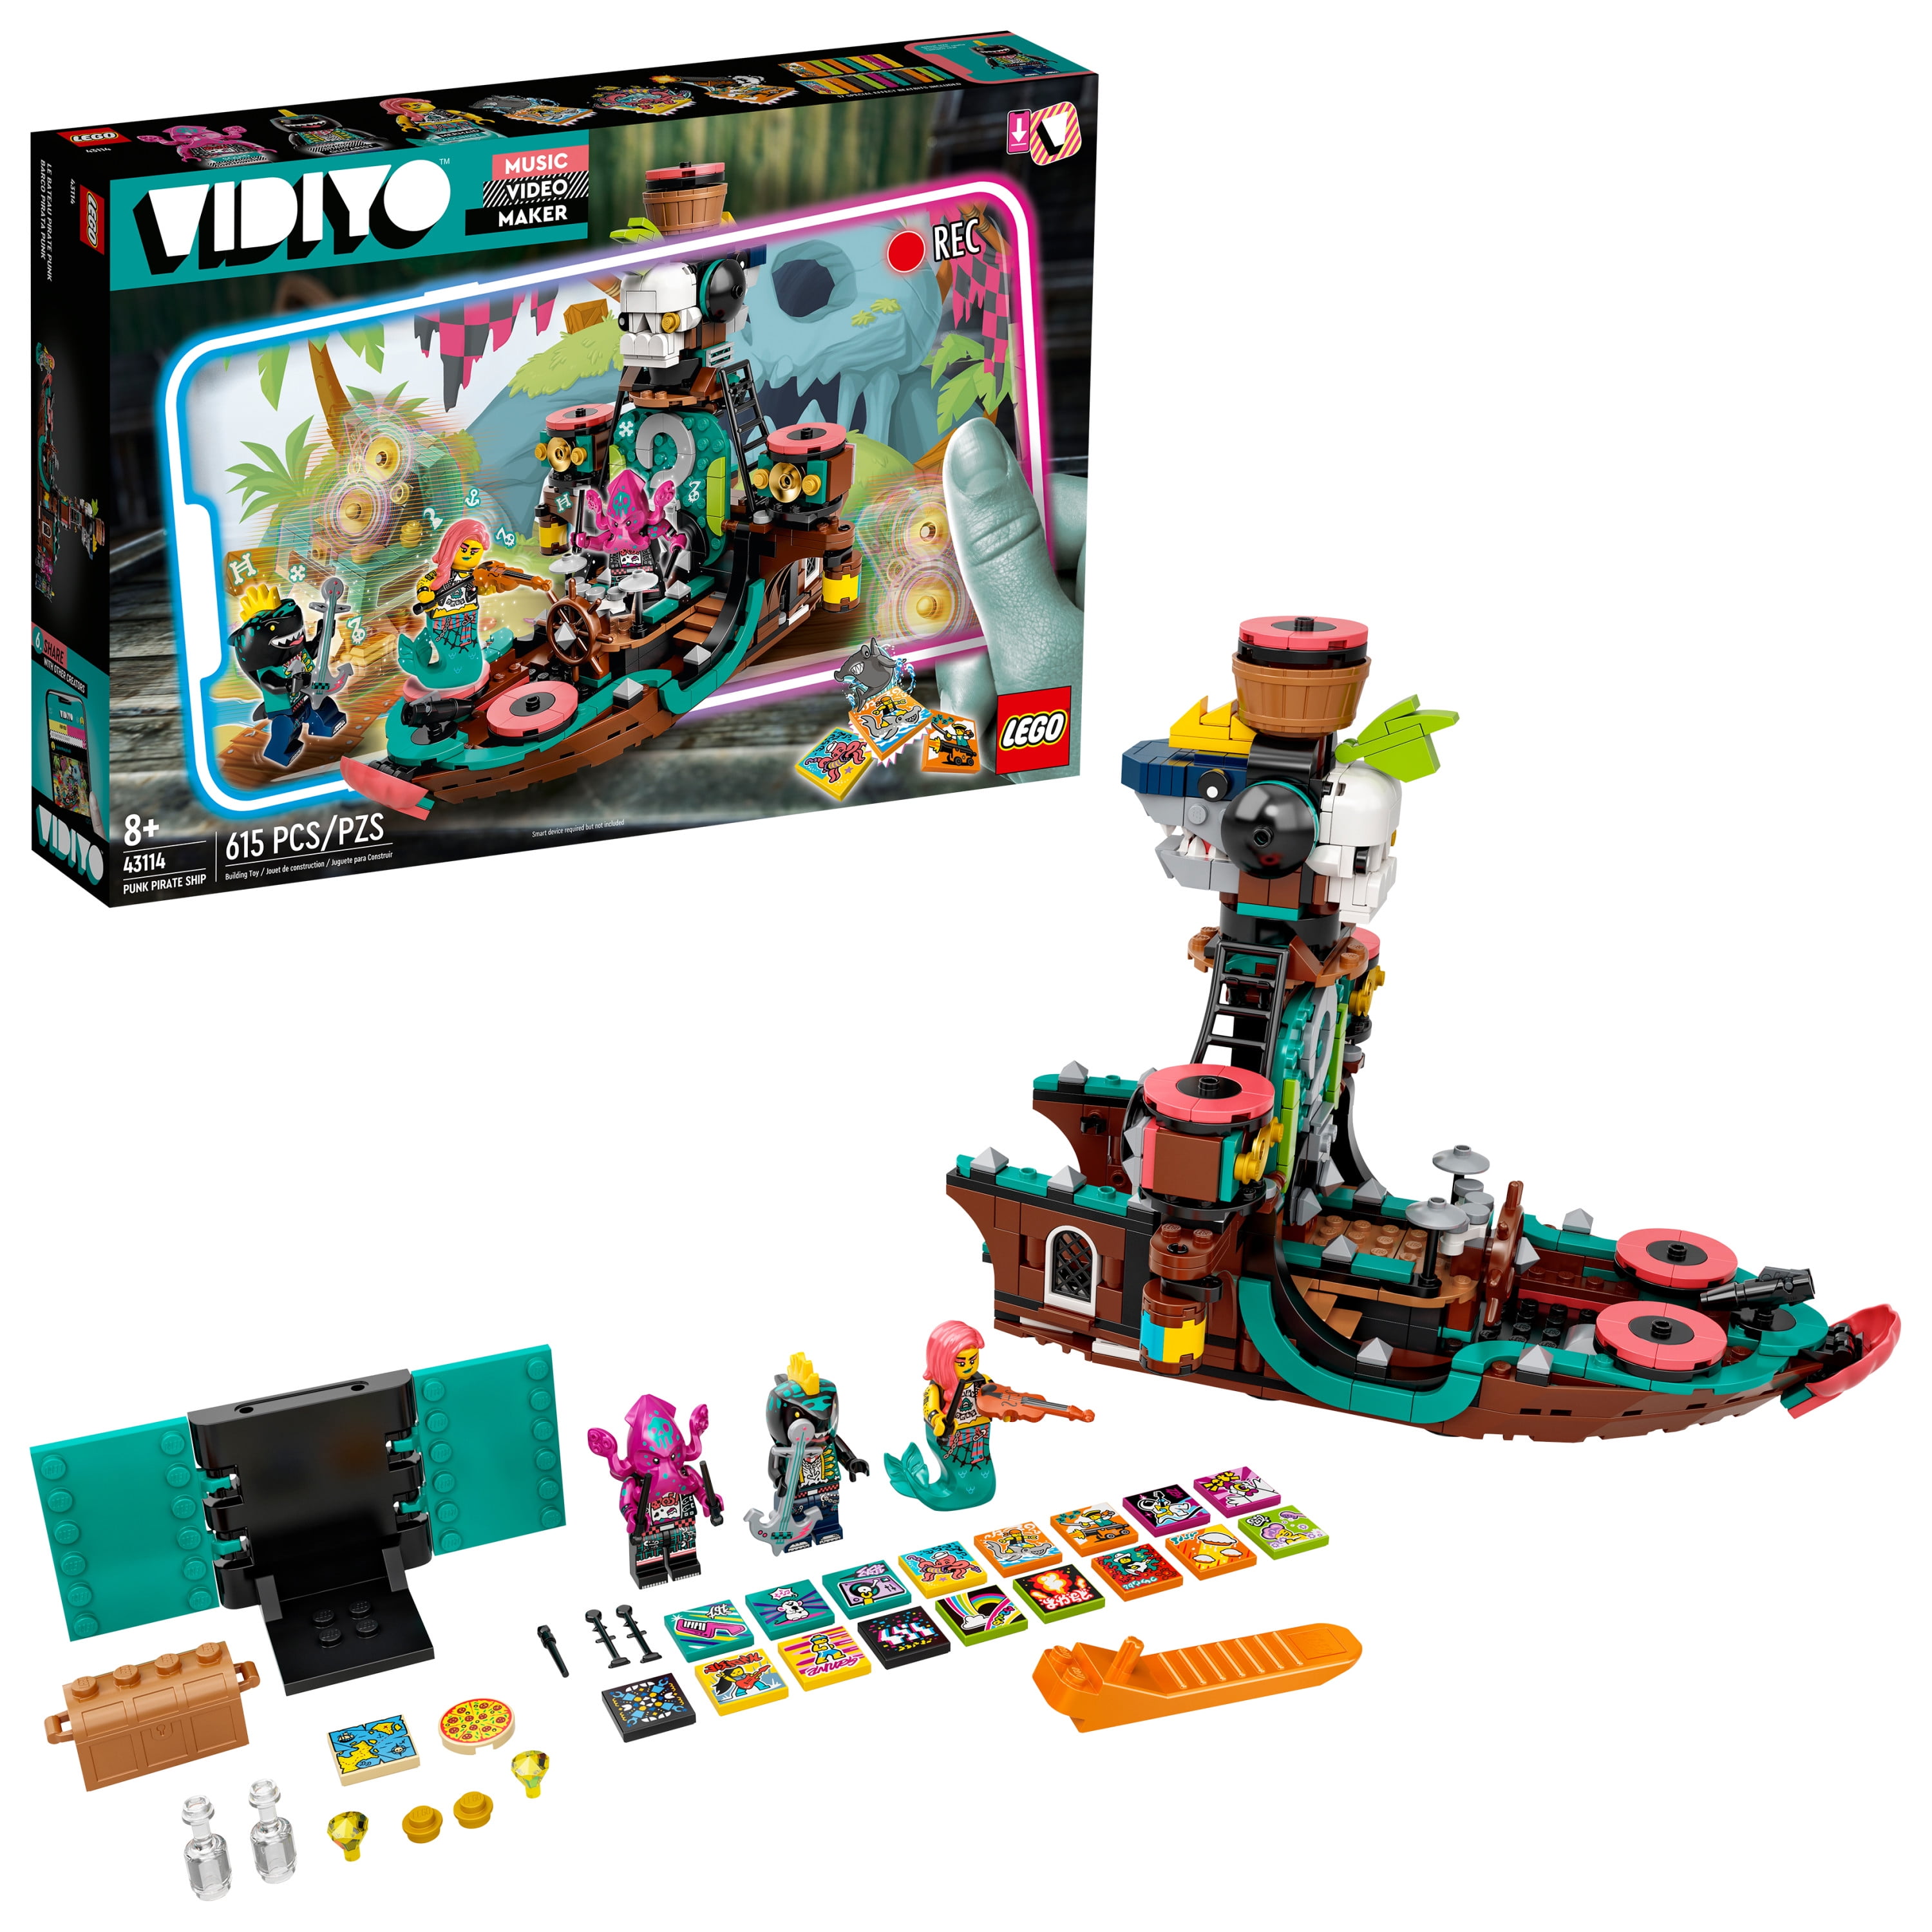 LEGO VIDIYO Punk Pirate Ship Inspire Kids to Direct and in Their Own Music Videos (615 Pieces) Walmart.com